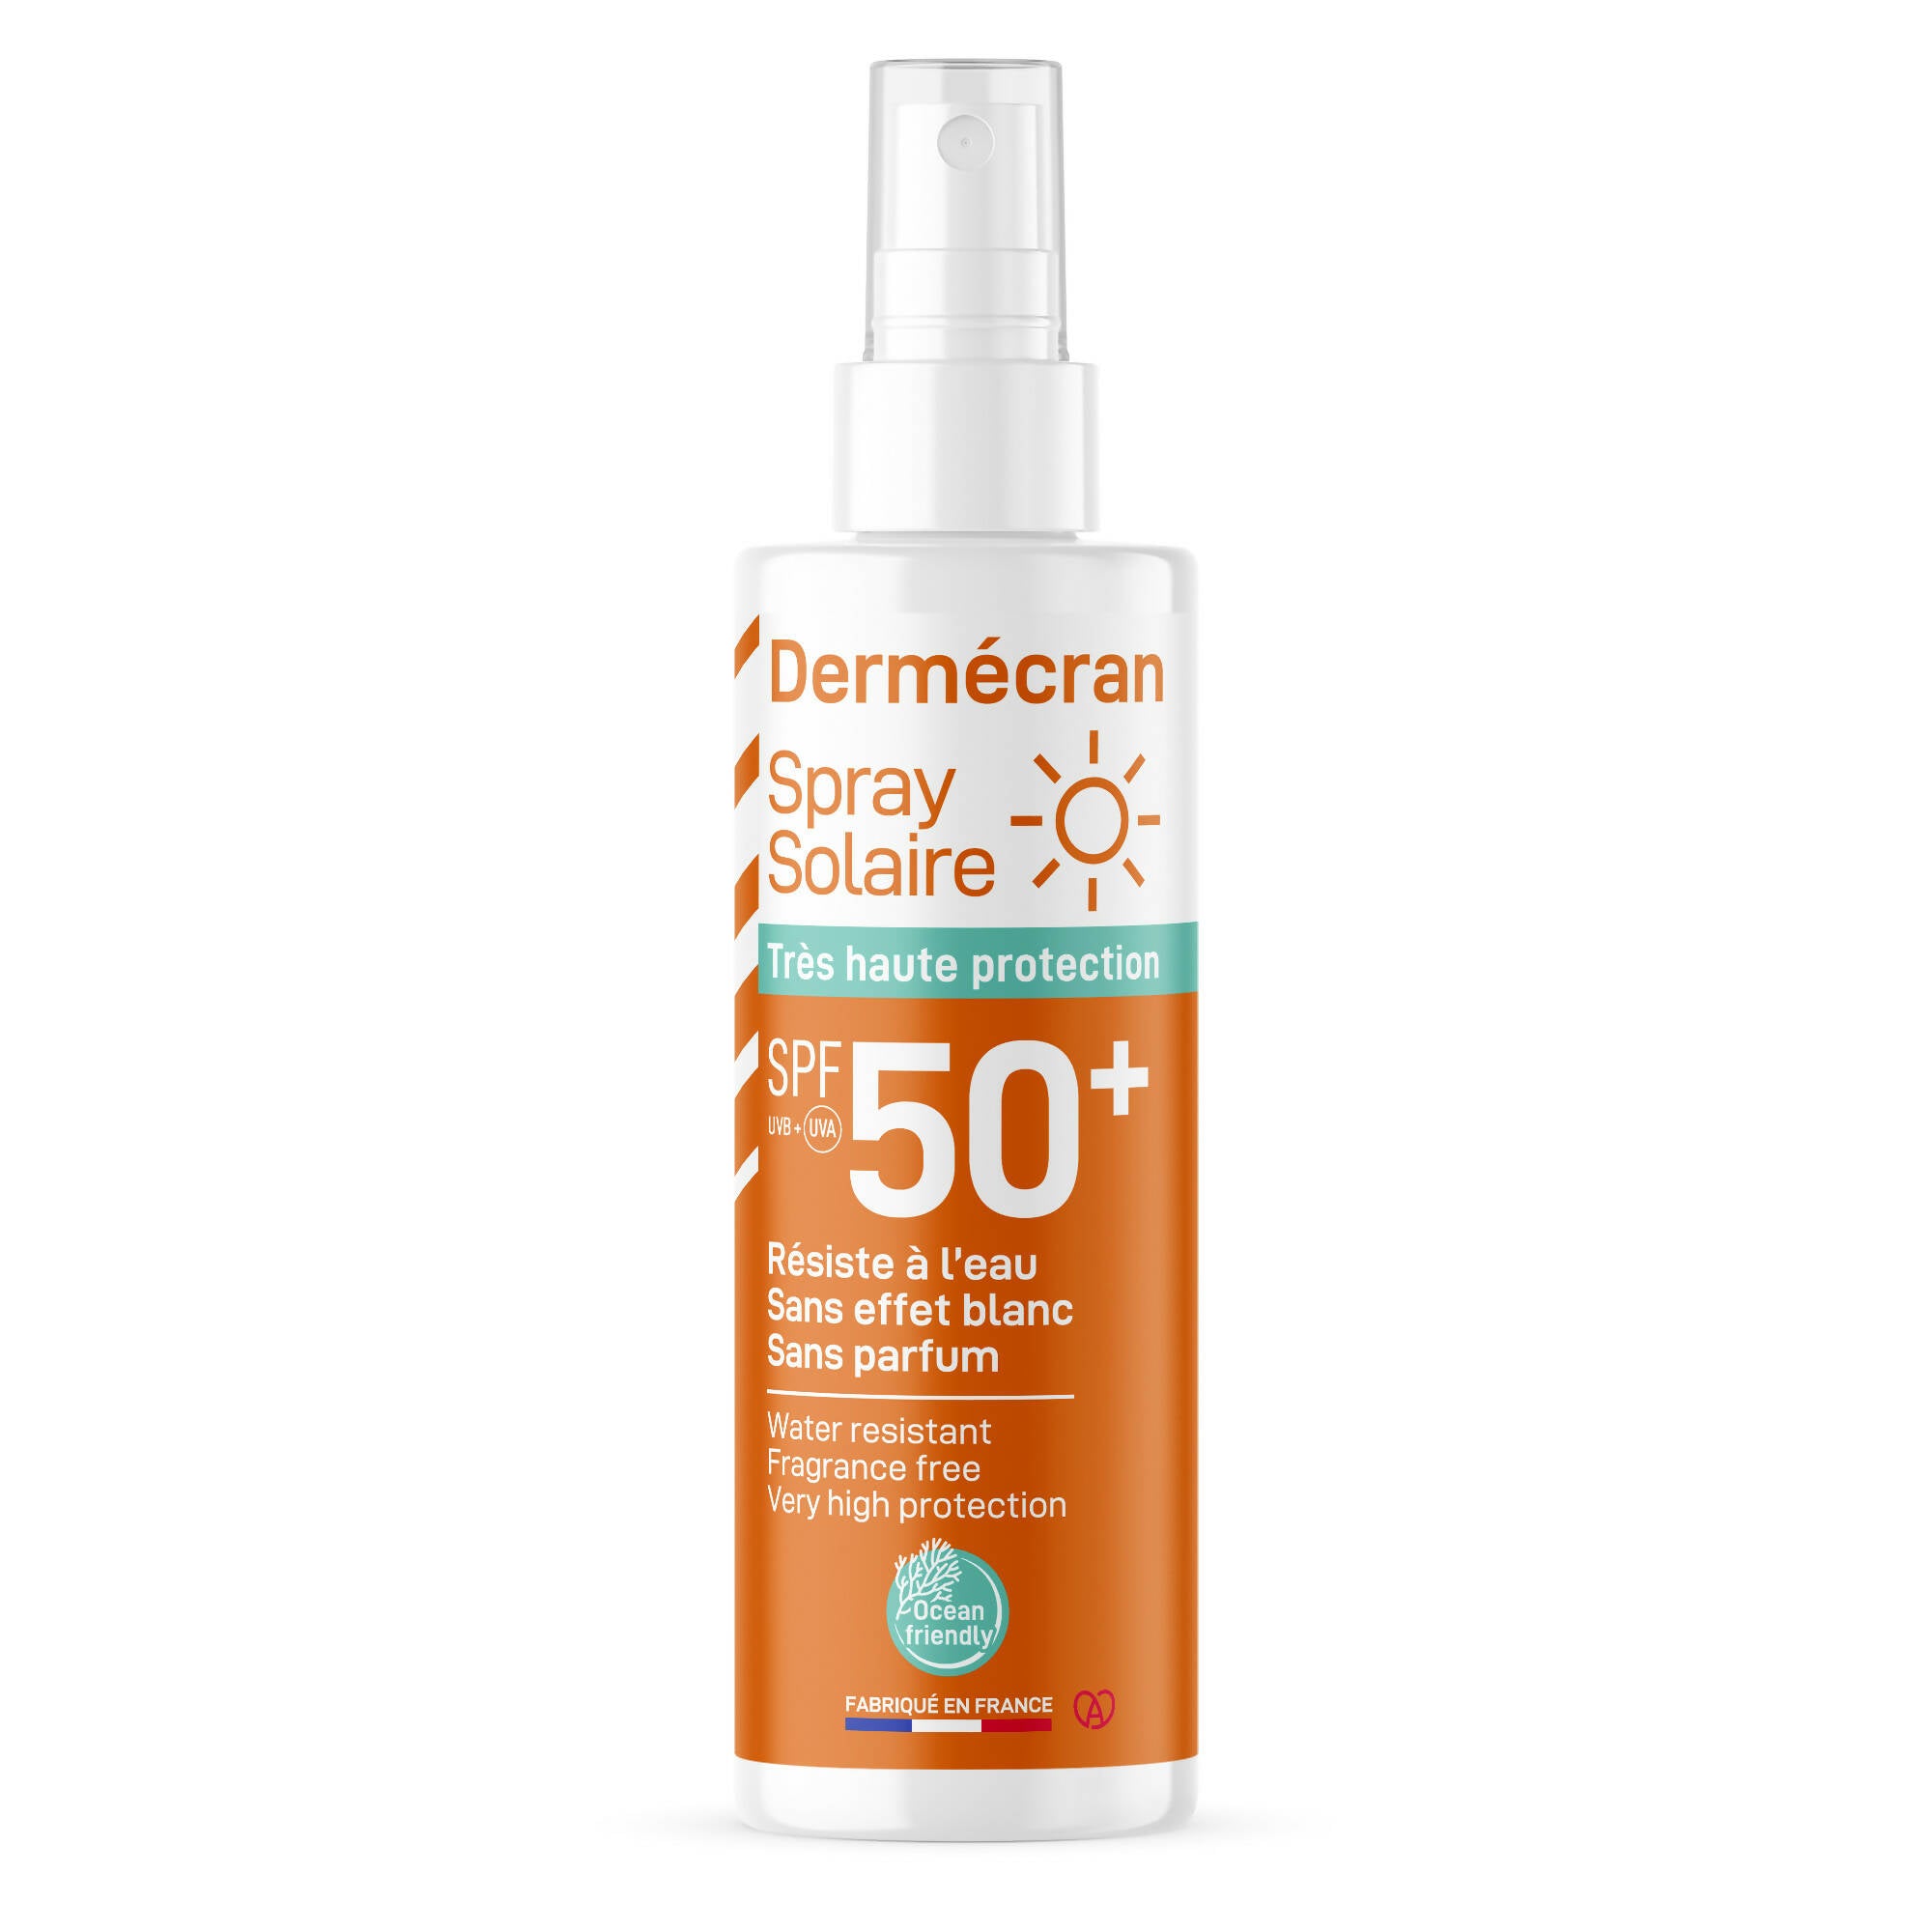 SORIFA - Dermscreen - SPF50+ sun spray - Face and body - Ocean Friendly formula - Water resistant - For the whole family from 3 years old - Made in France - 200 ml spray